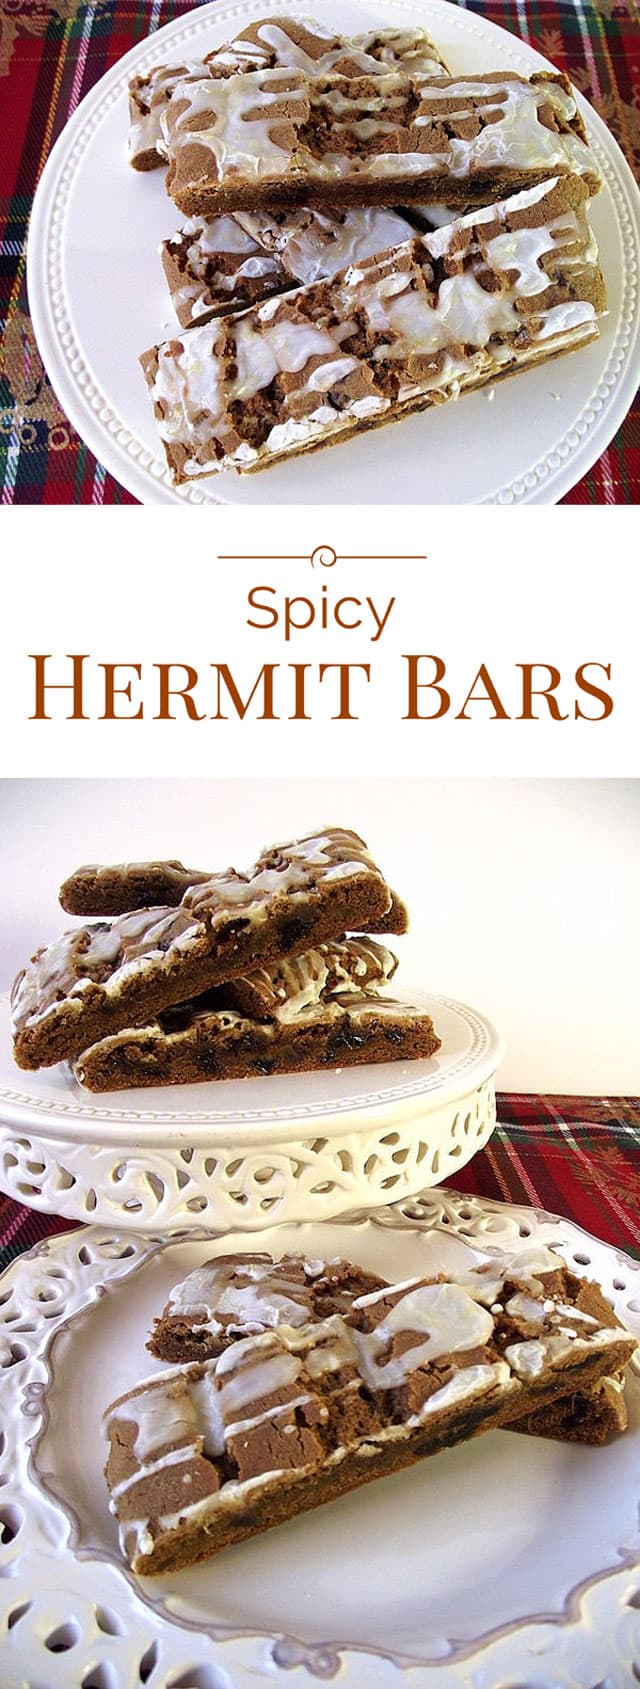 Spicy-Hermit-Bars-Collage-Barbara-Bakes